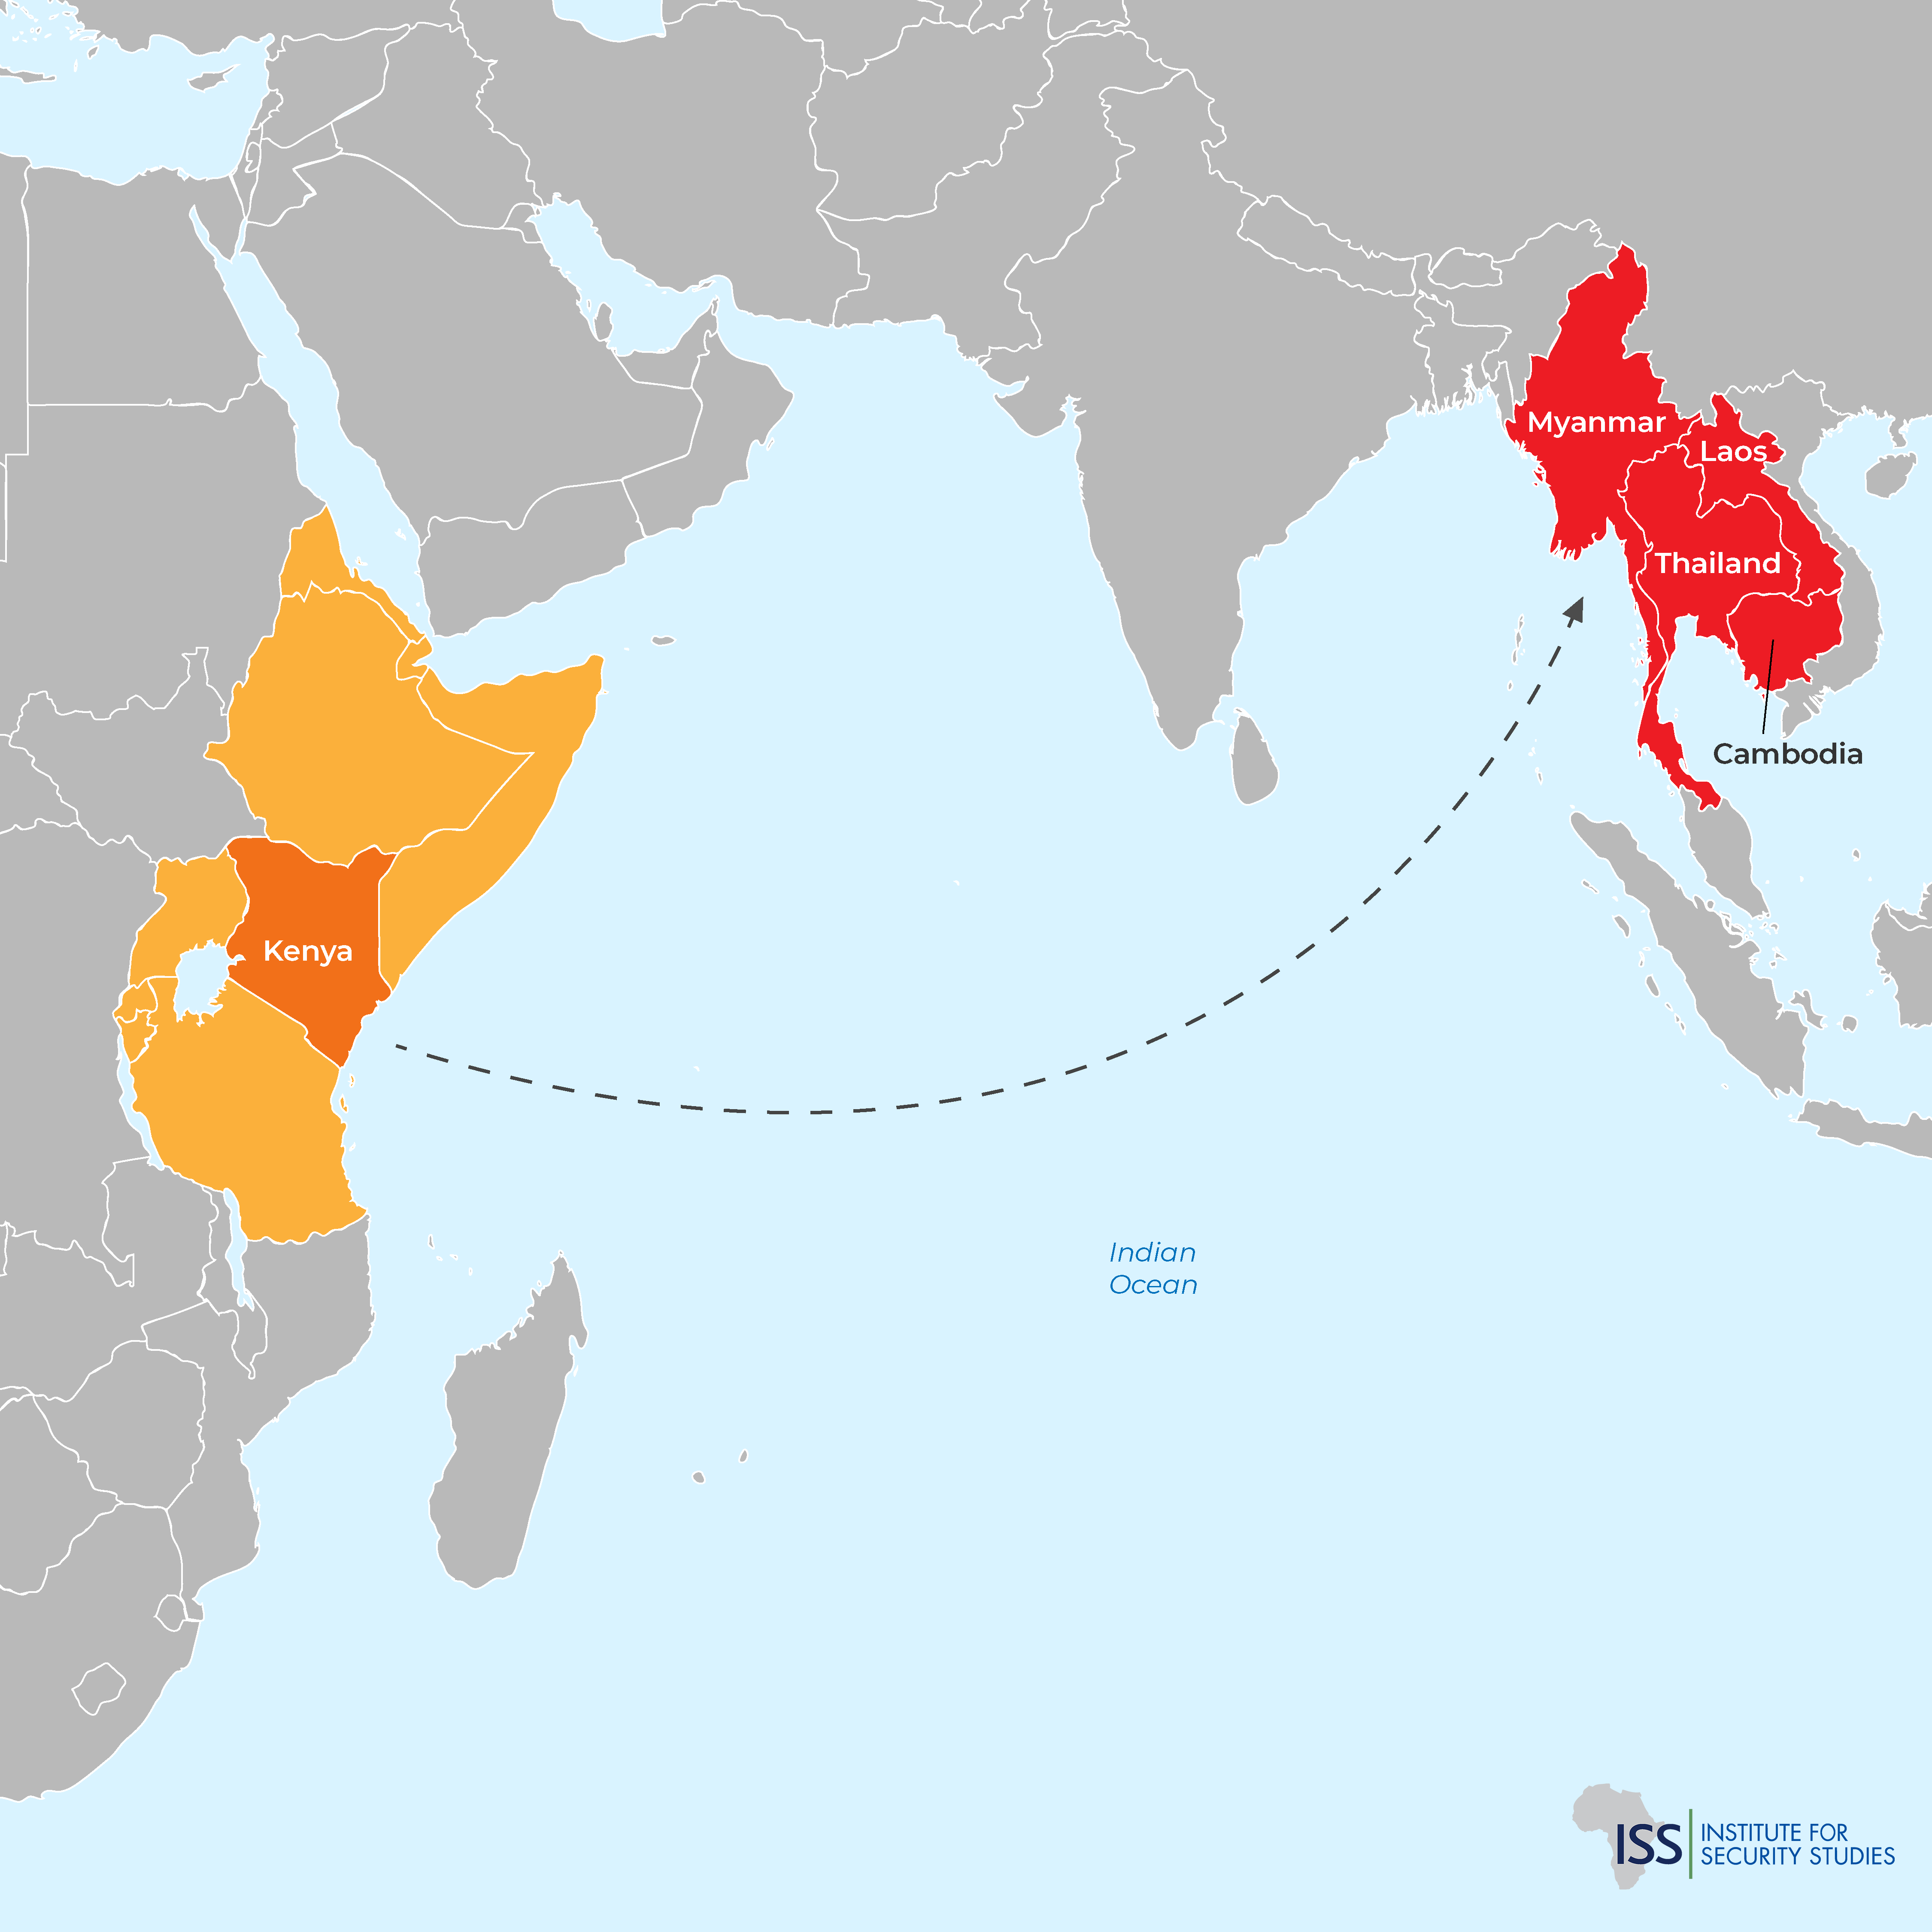 Human trafficking route from East Africa to Southeast Asia